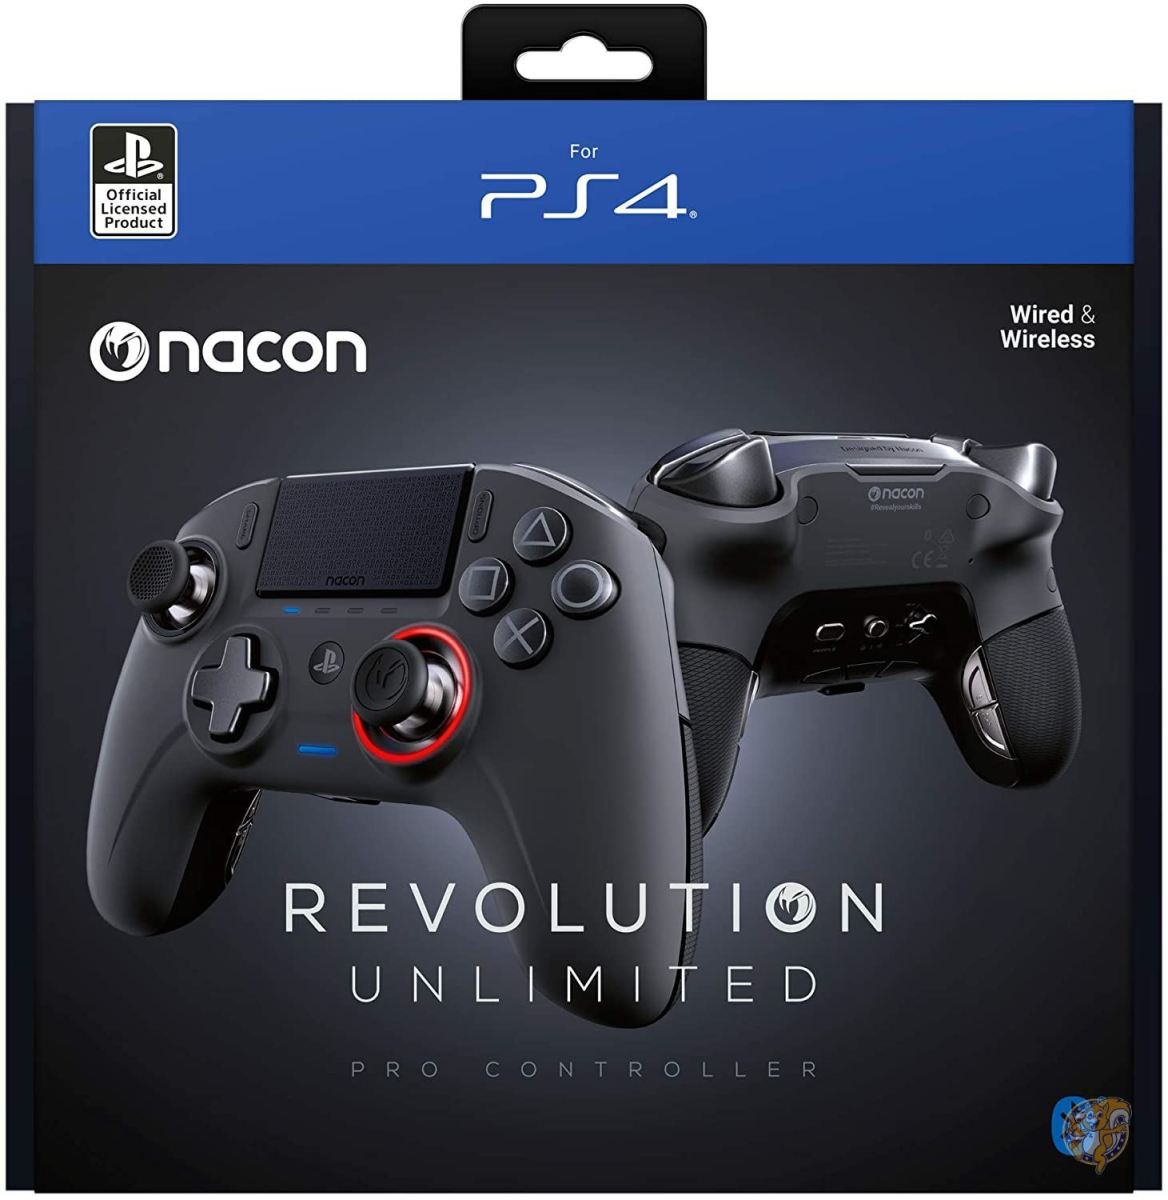 NACON Controller Esports Revolution Unlimited Pro V3 PS4 Playstation 4 / PC - Wireless/Wired - Nacon-31160 2371-1 送料無料